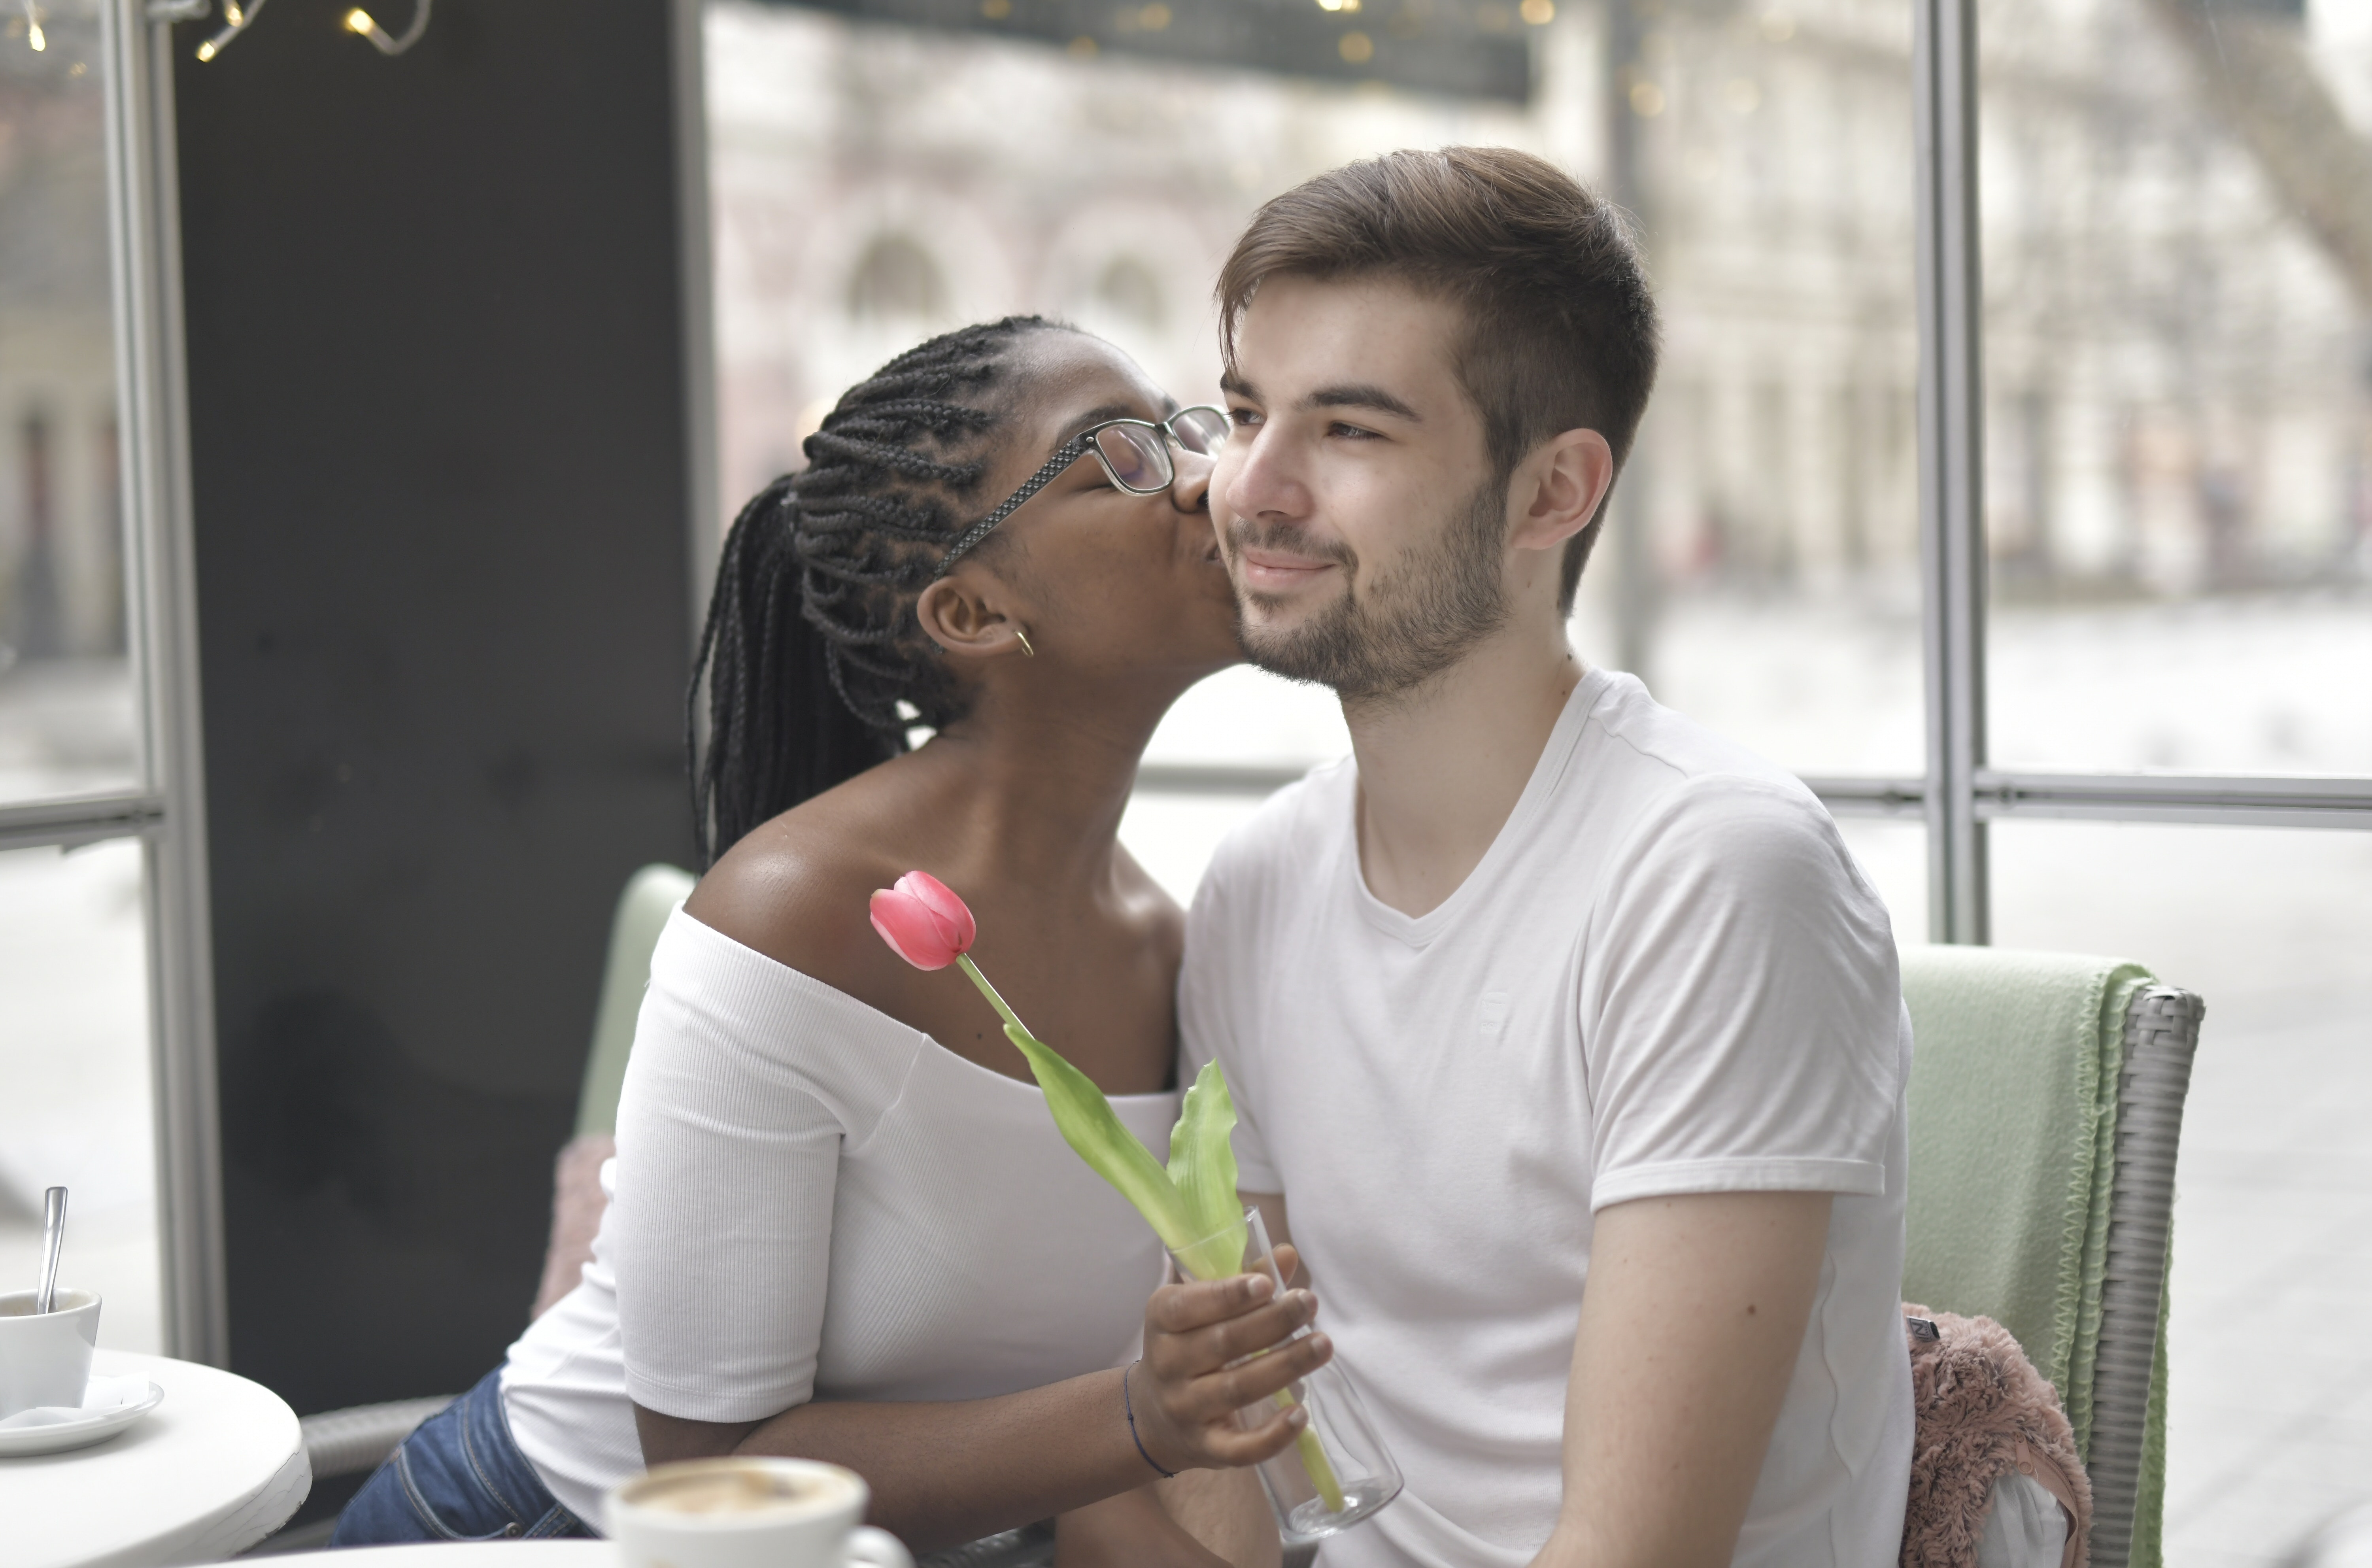 A woman kissing a man's cheek while holding a flower. | Source: Pexels